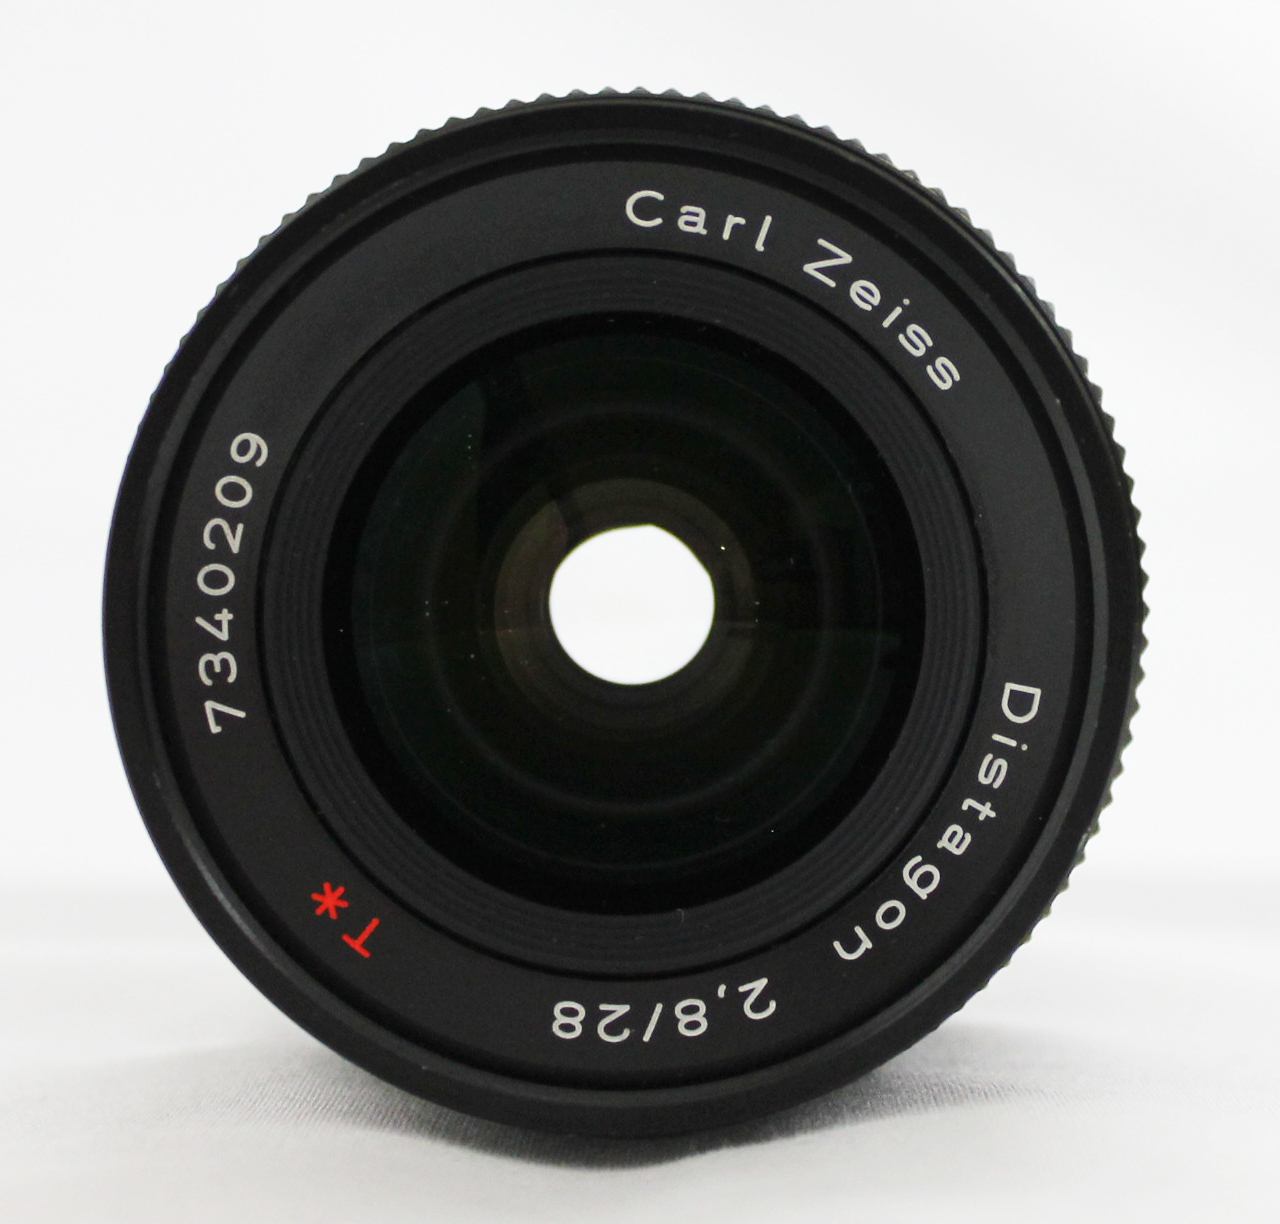  Contax Carl Zeiss Distagon T* 28mm F2.8 MMJ Lens CY Y/C Mount from Japan Photo 5